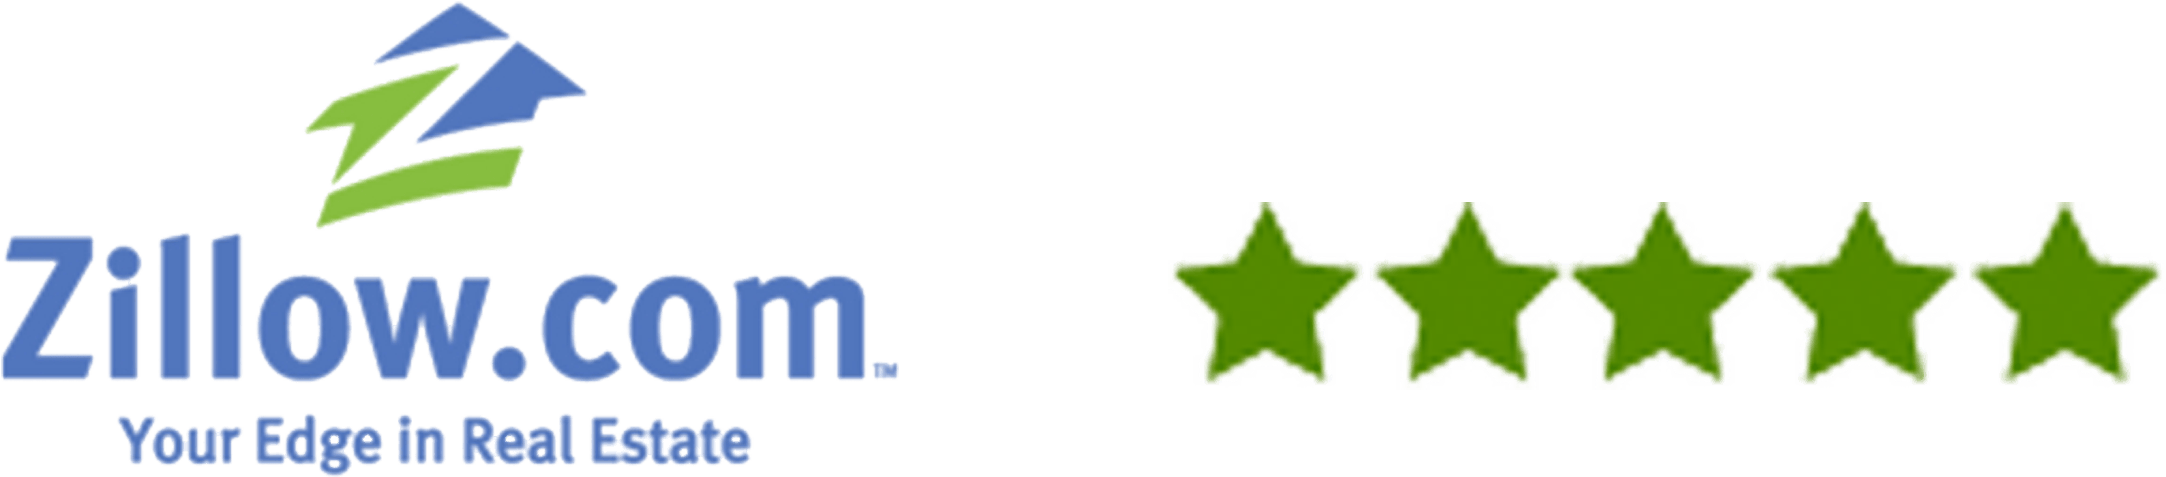 Zillow 5 Star Logo - Download Zillow 5 Star Logo Png - Zillow Real Estate PNG Image with ...